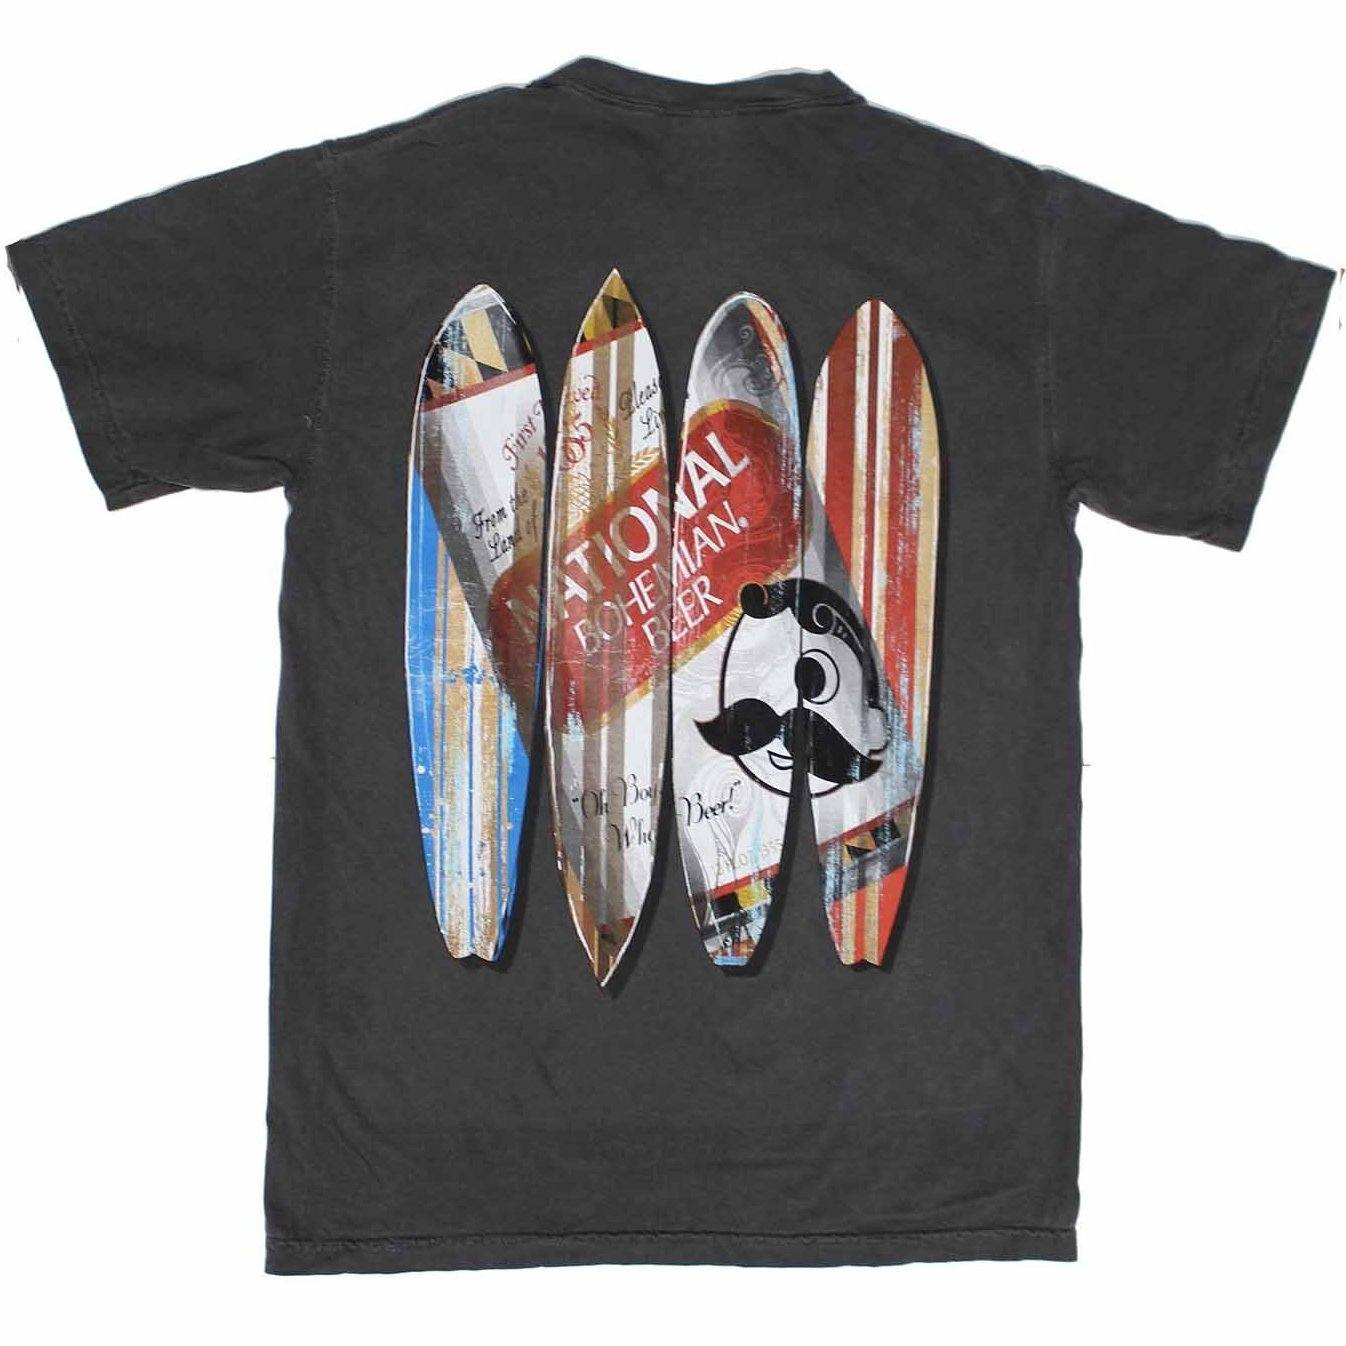 Natty Boh Can Surfboards (Pepper) / Shirt - Route One Apparel